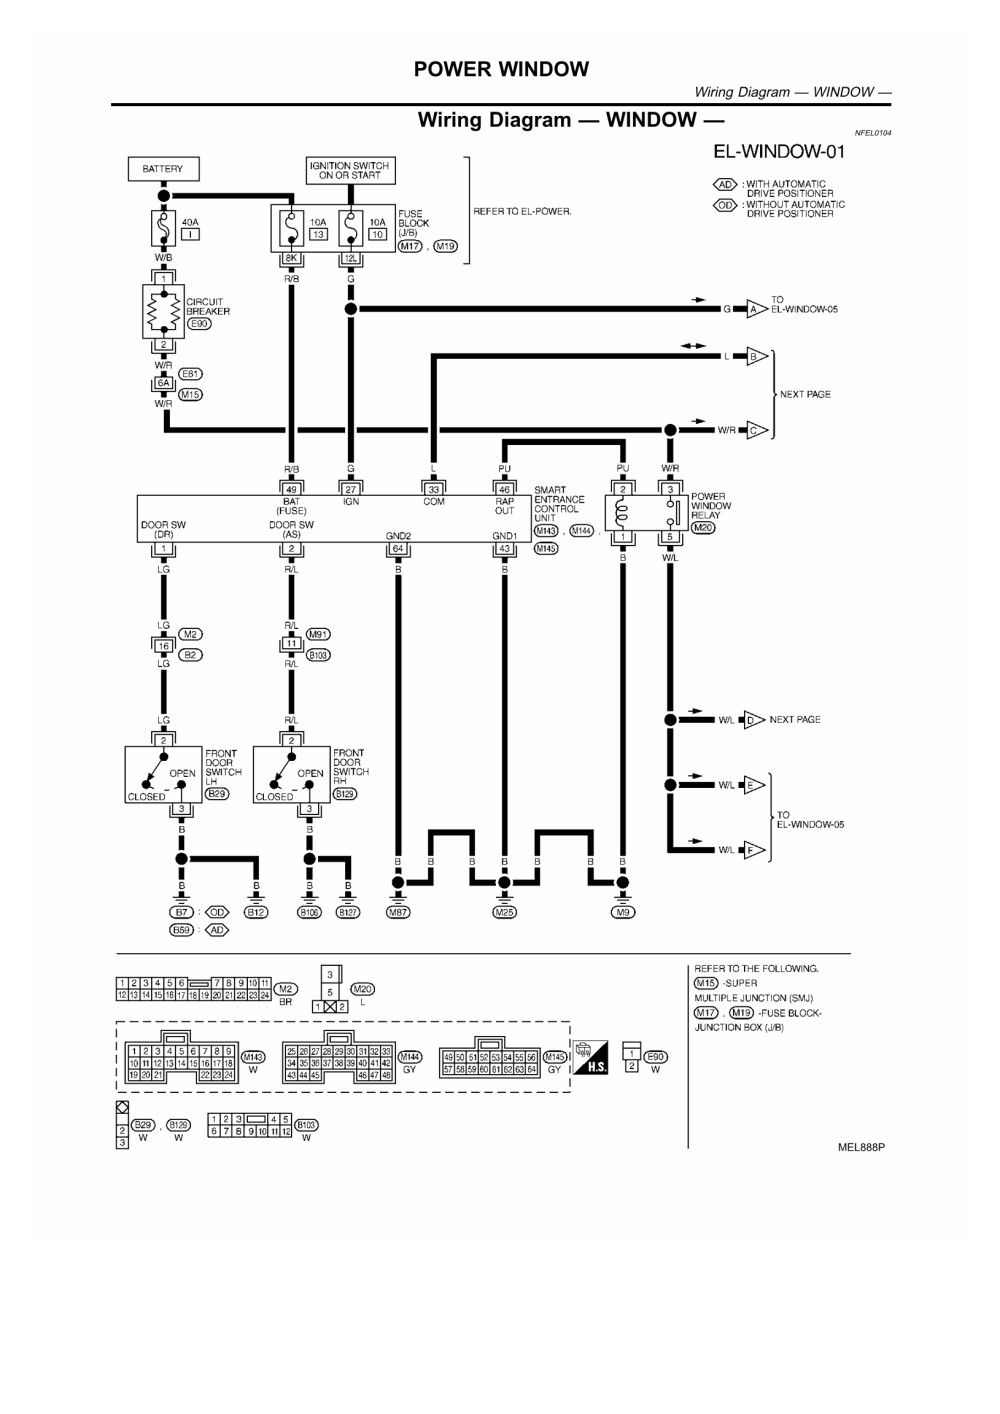 Wiring Diagram WINDOW Page 01 2003